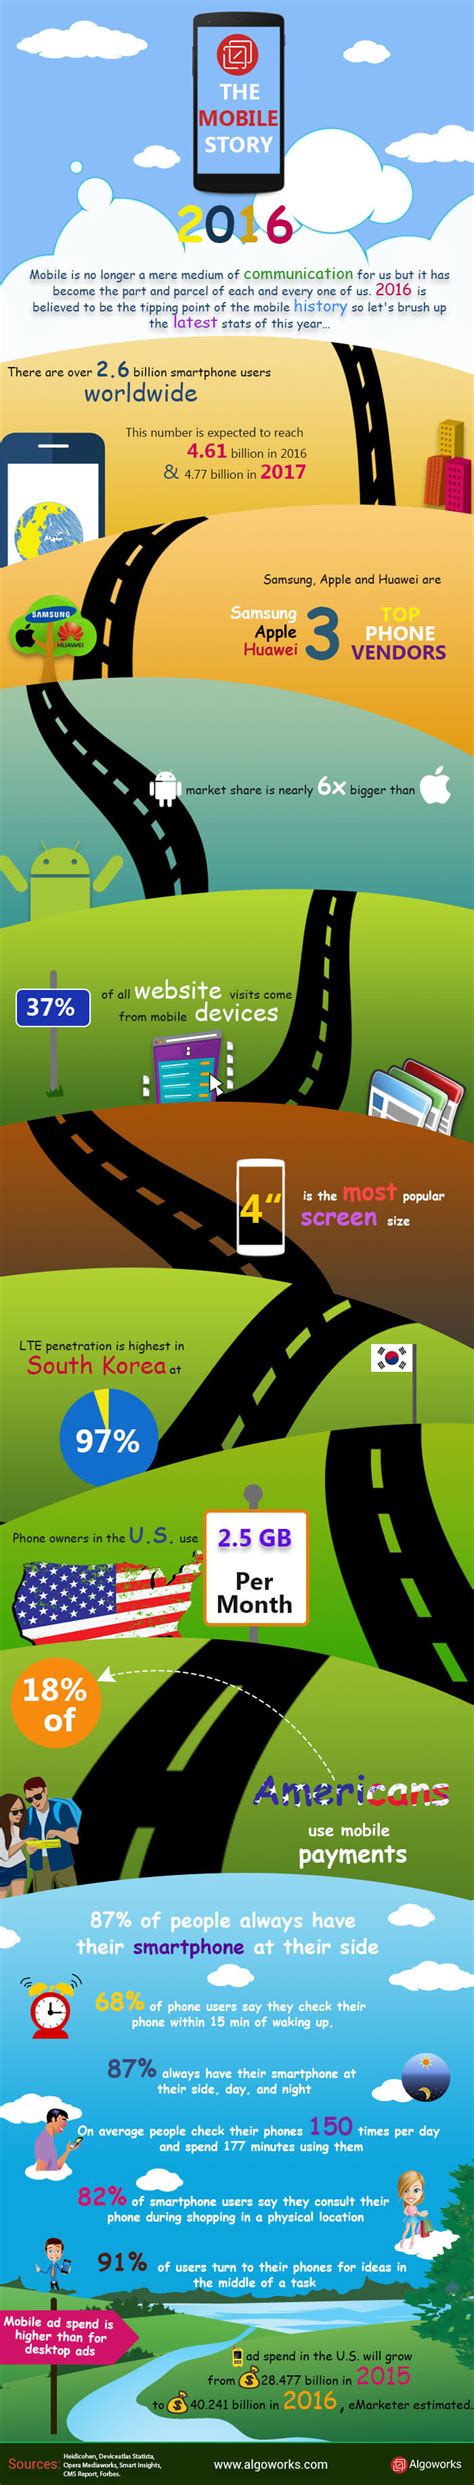 The Mobile Story An Infographic Algoworks